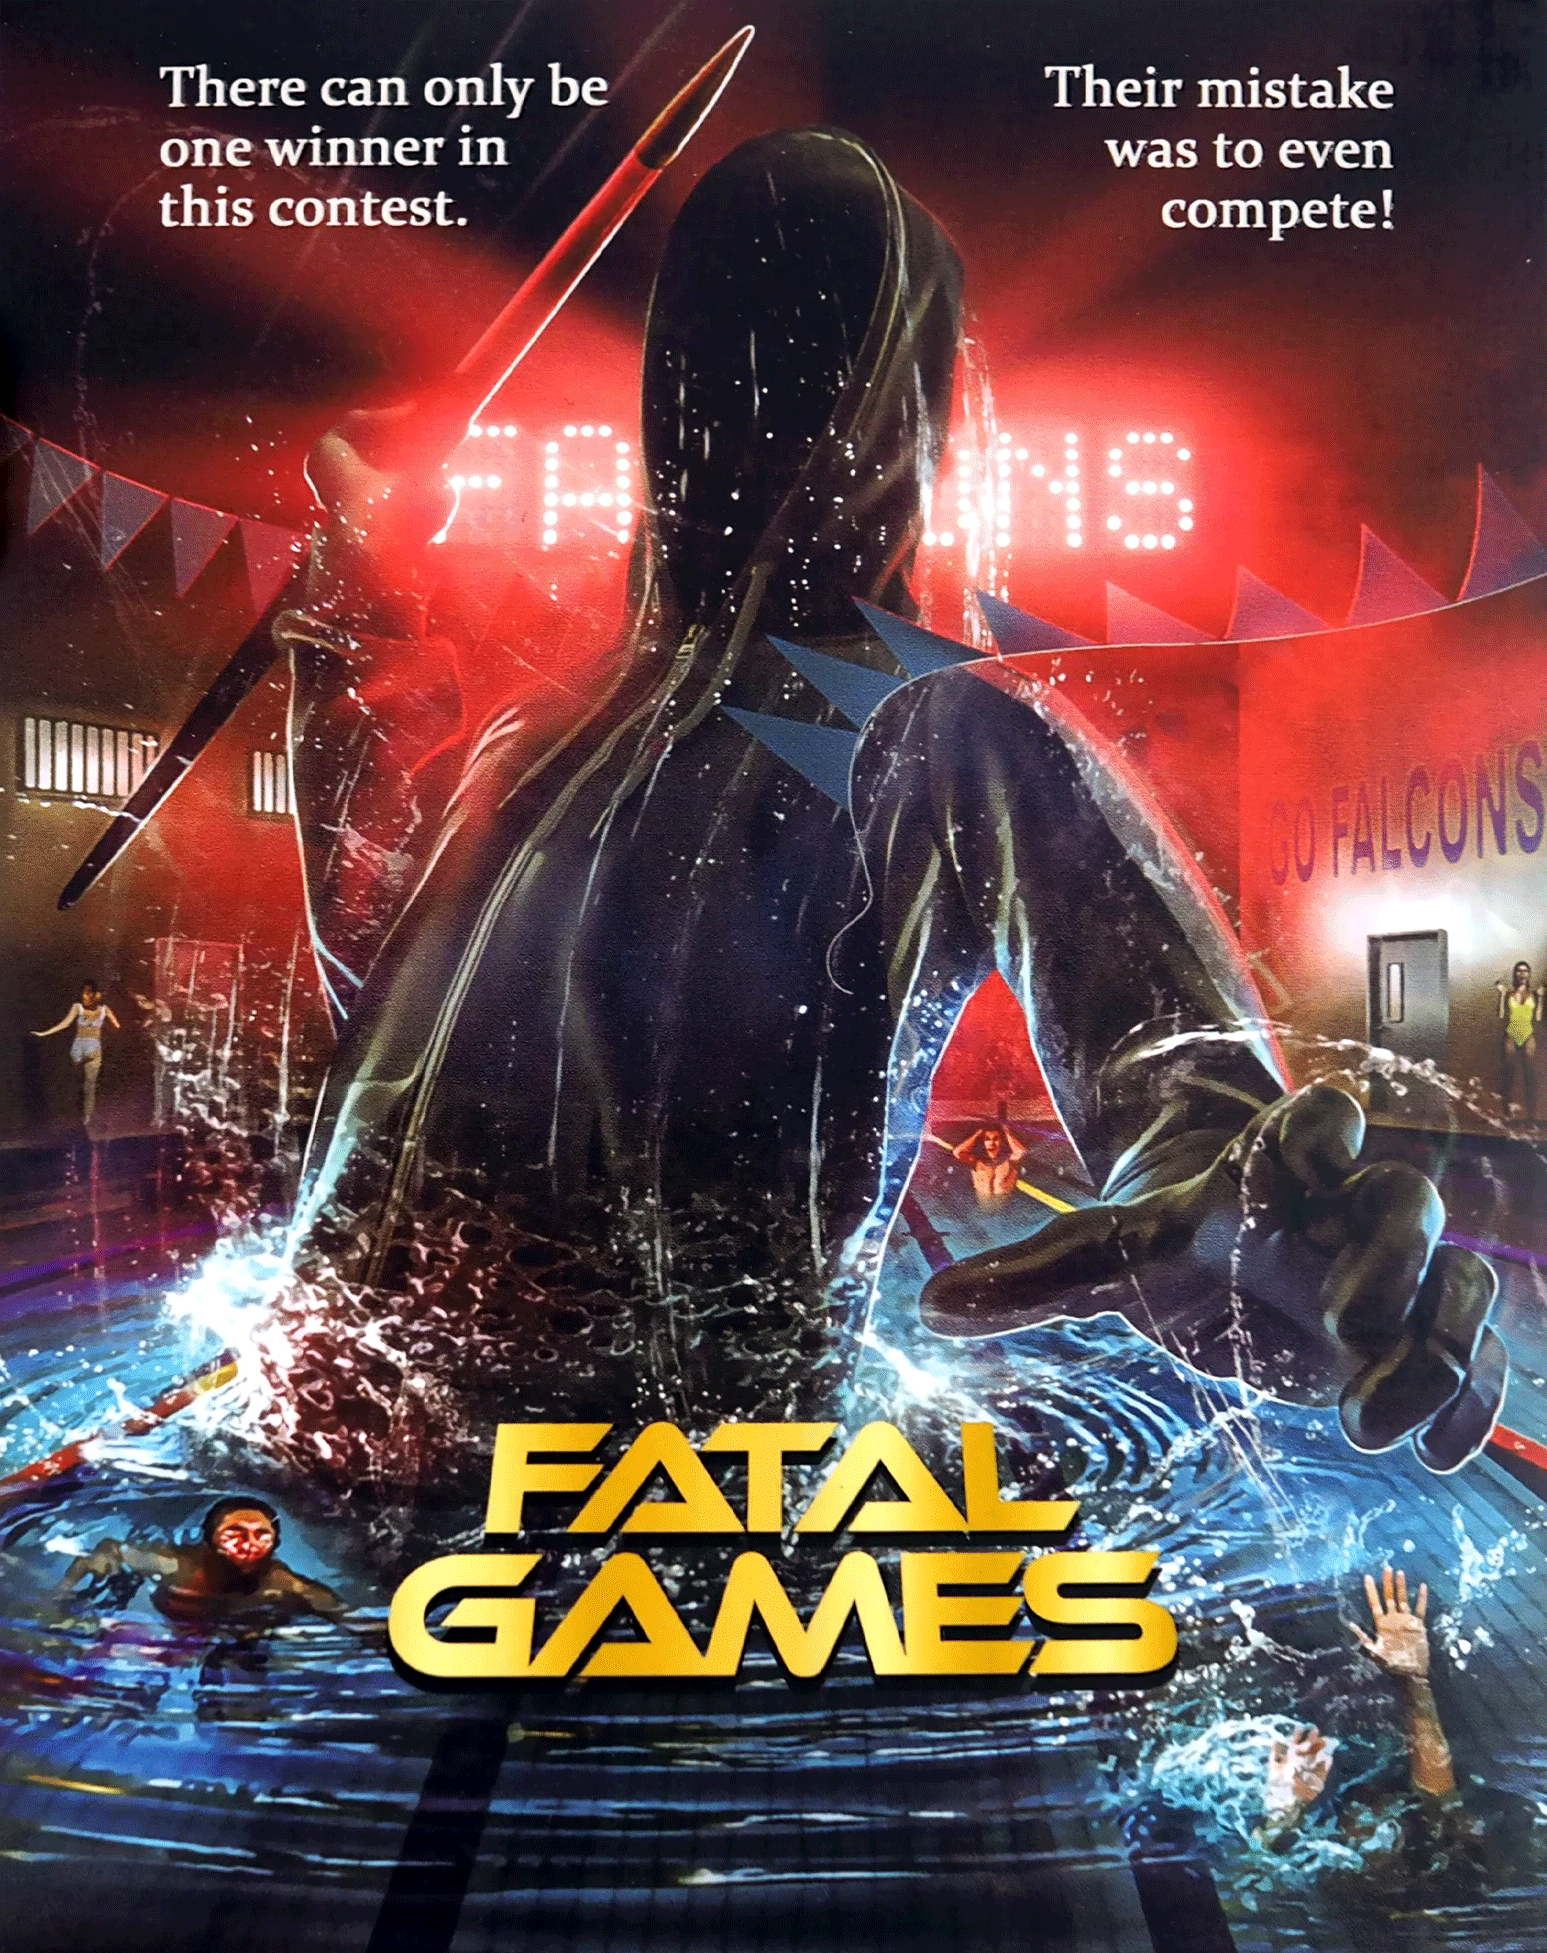 FATAL GAMES - BLU-RAY (LIMITED EDITION)